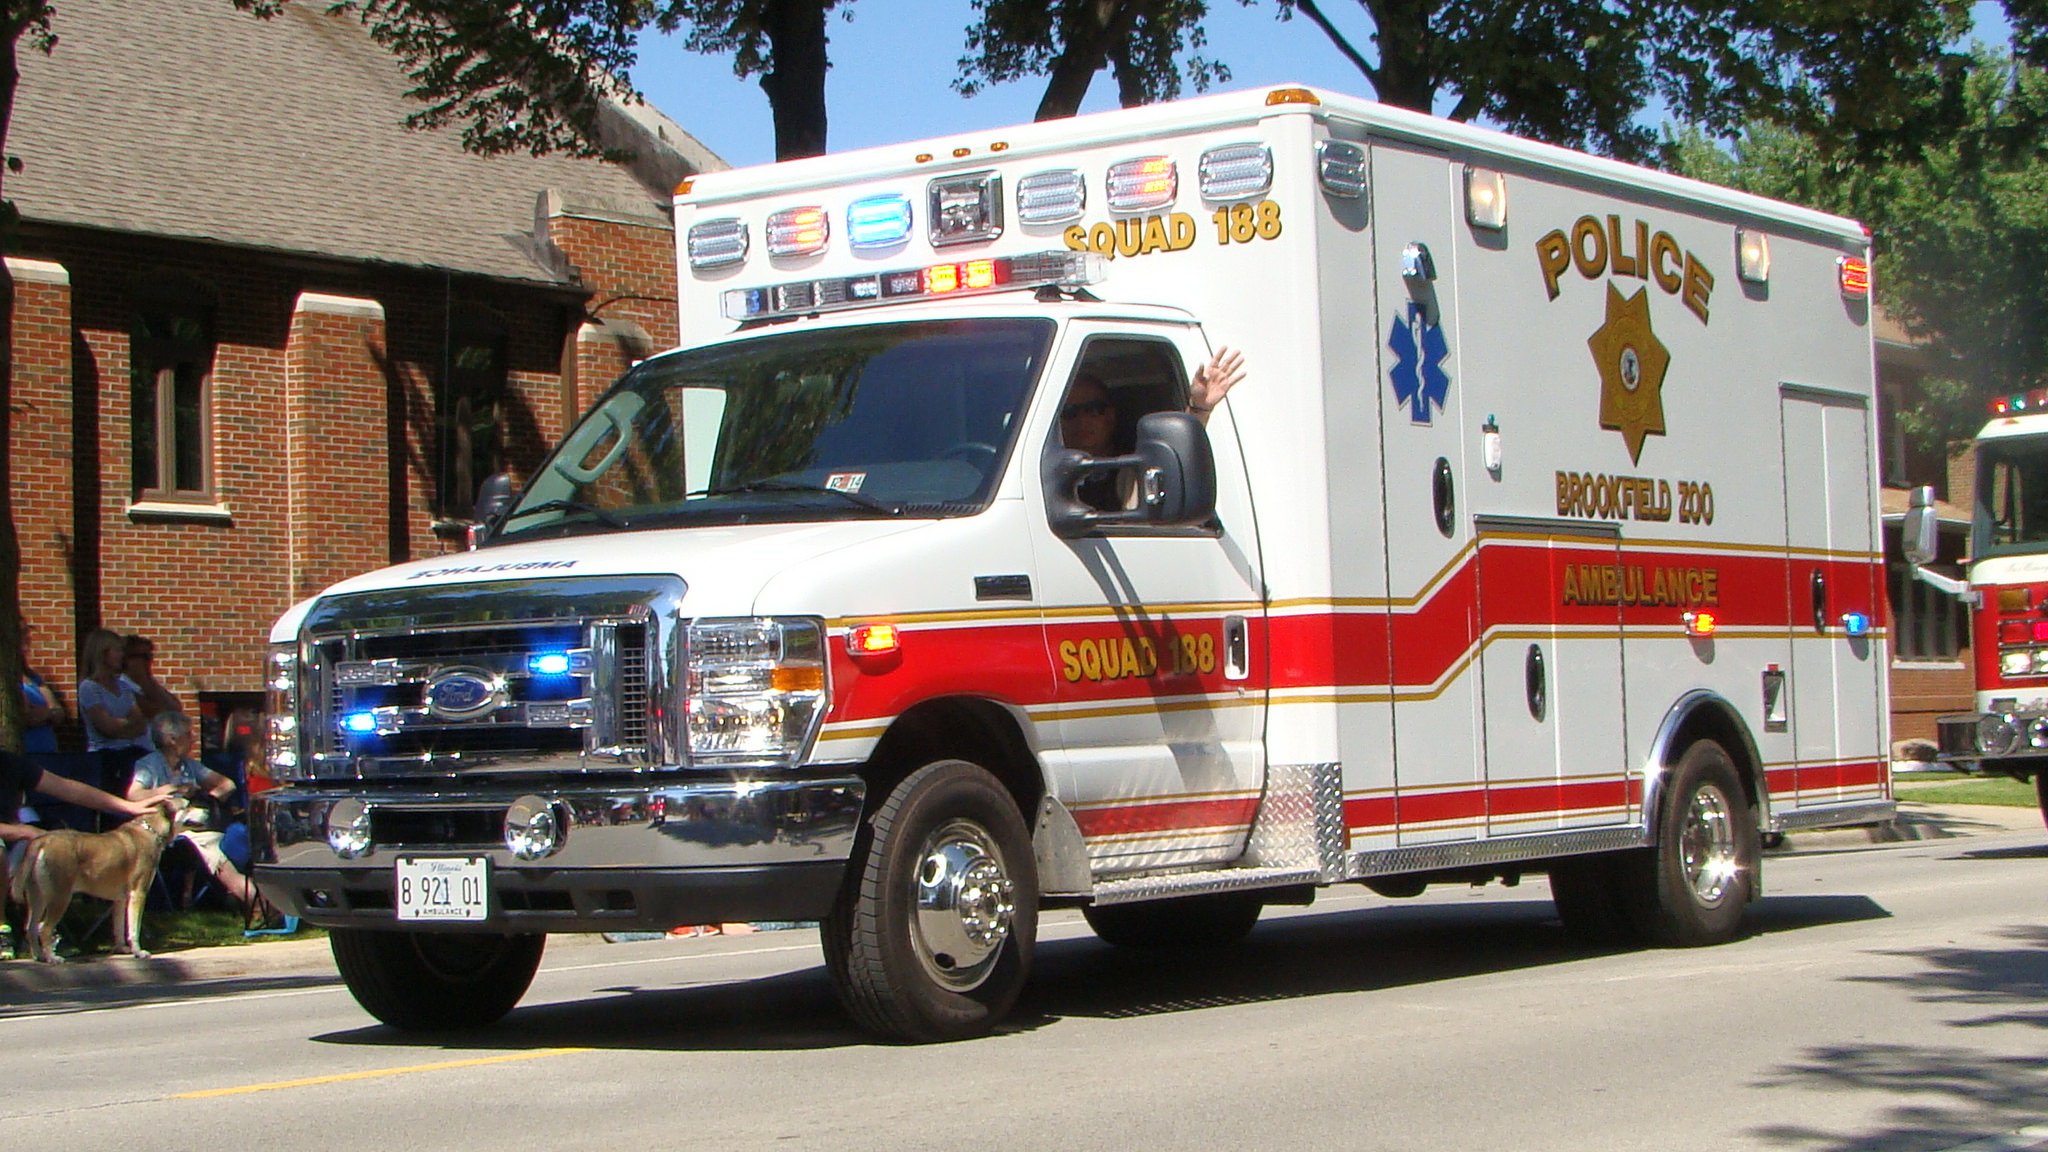 ambulance, Camion, Cars, Emergency, Fire, Fire, Departments, Medic, Chicago, Michigan, Pompier, Rescue, Suv, Truck, Usa Wallpaper